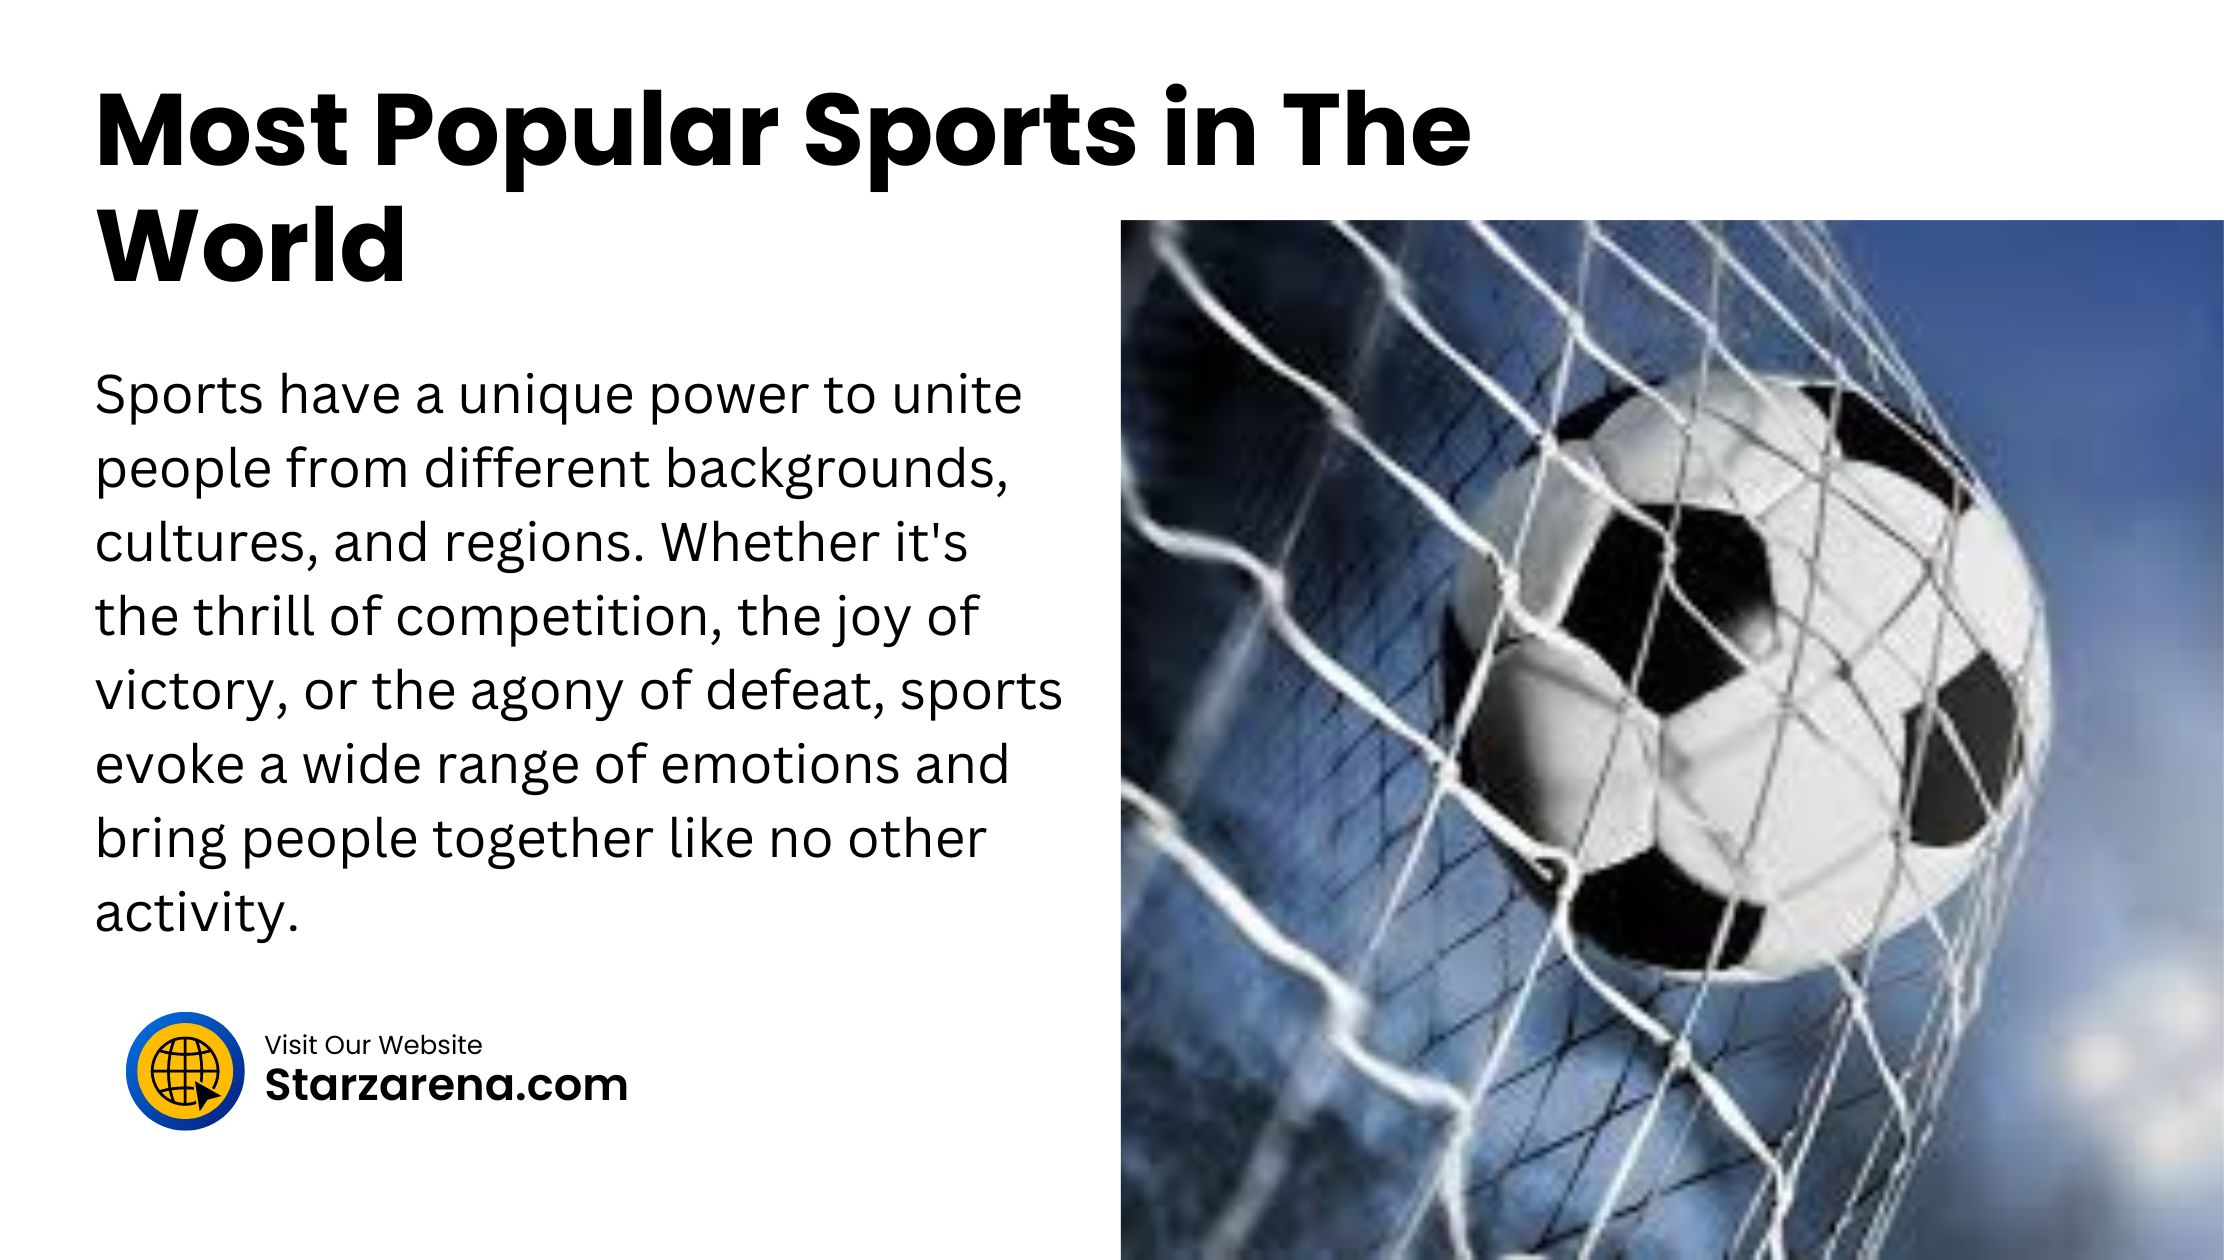 Most Popular Sports in The World